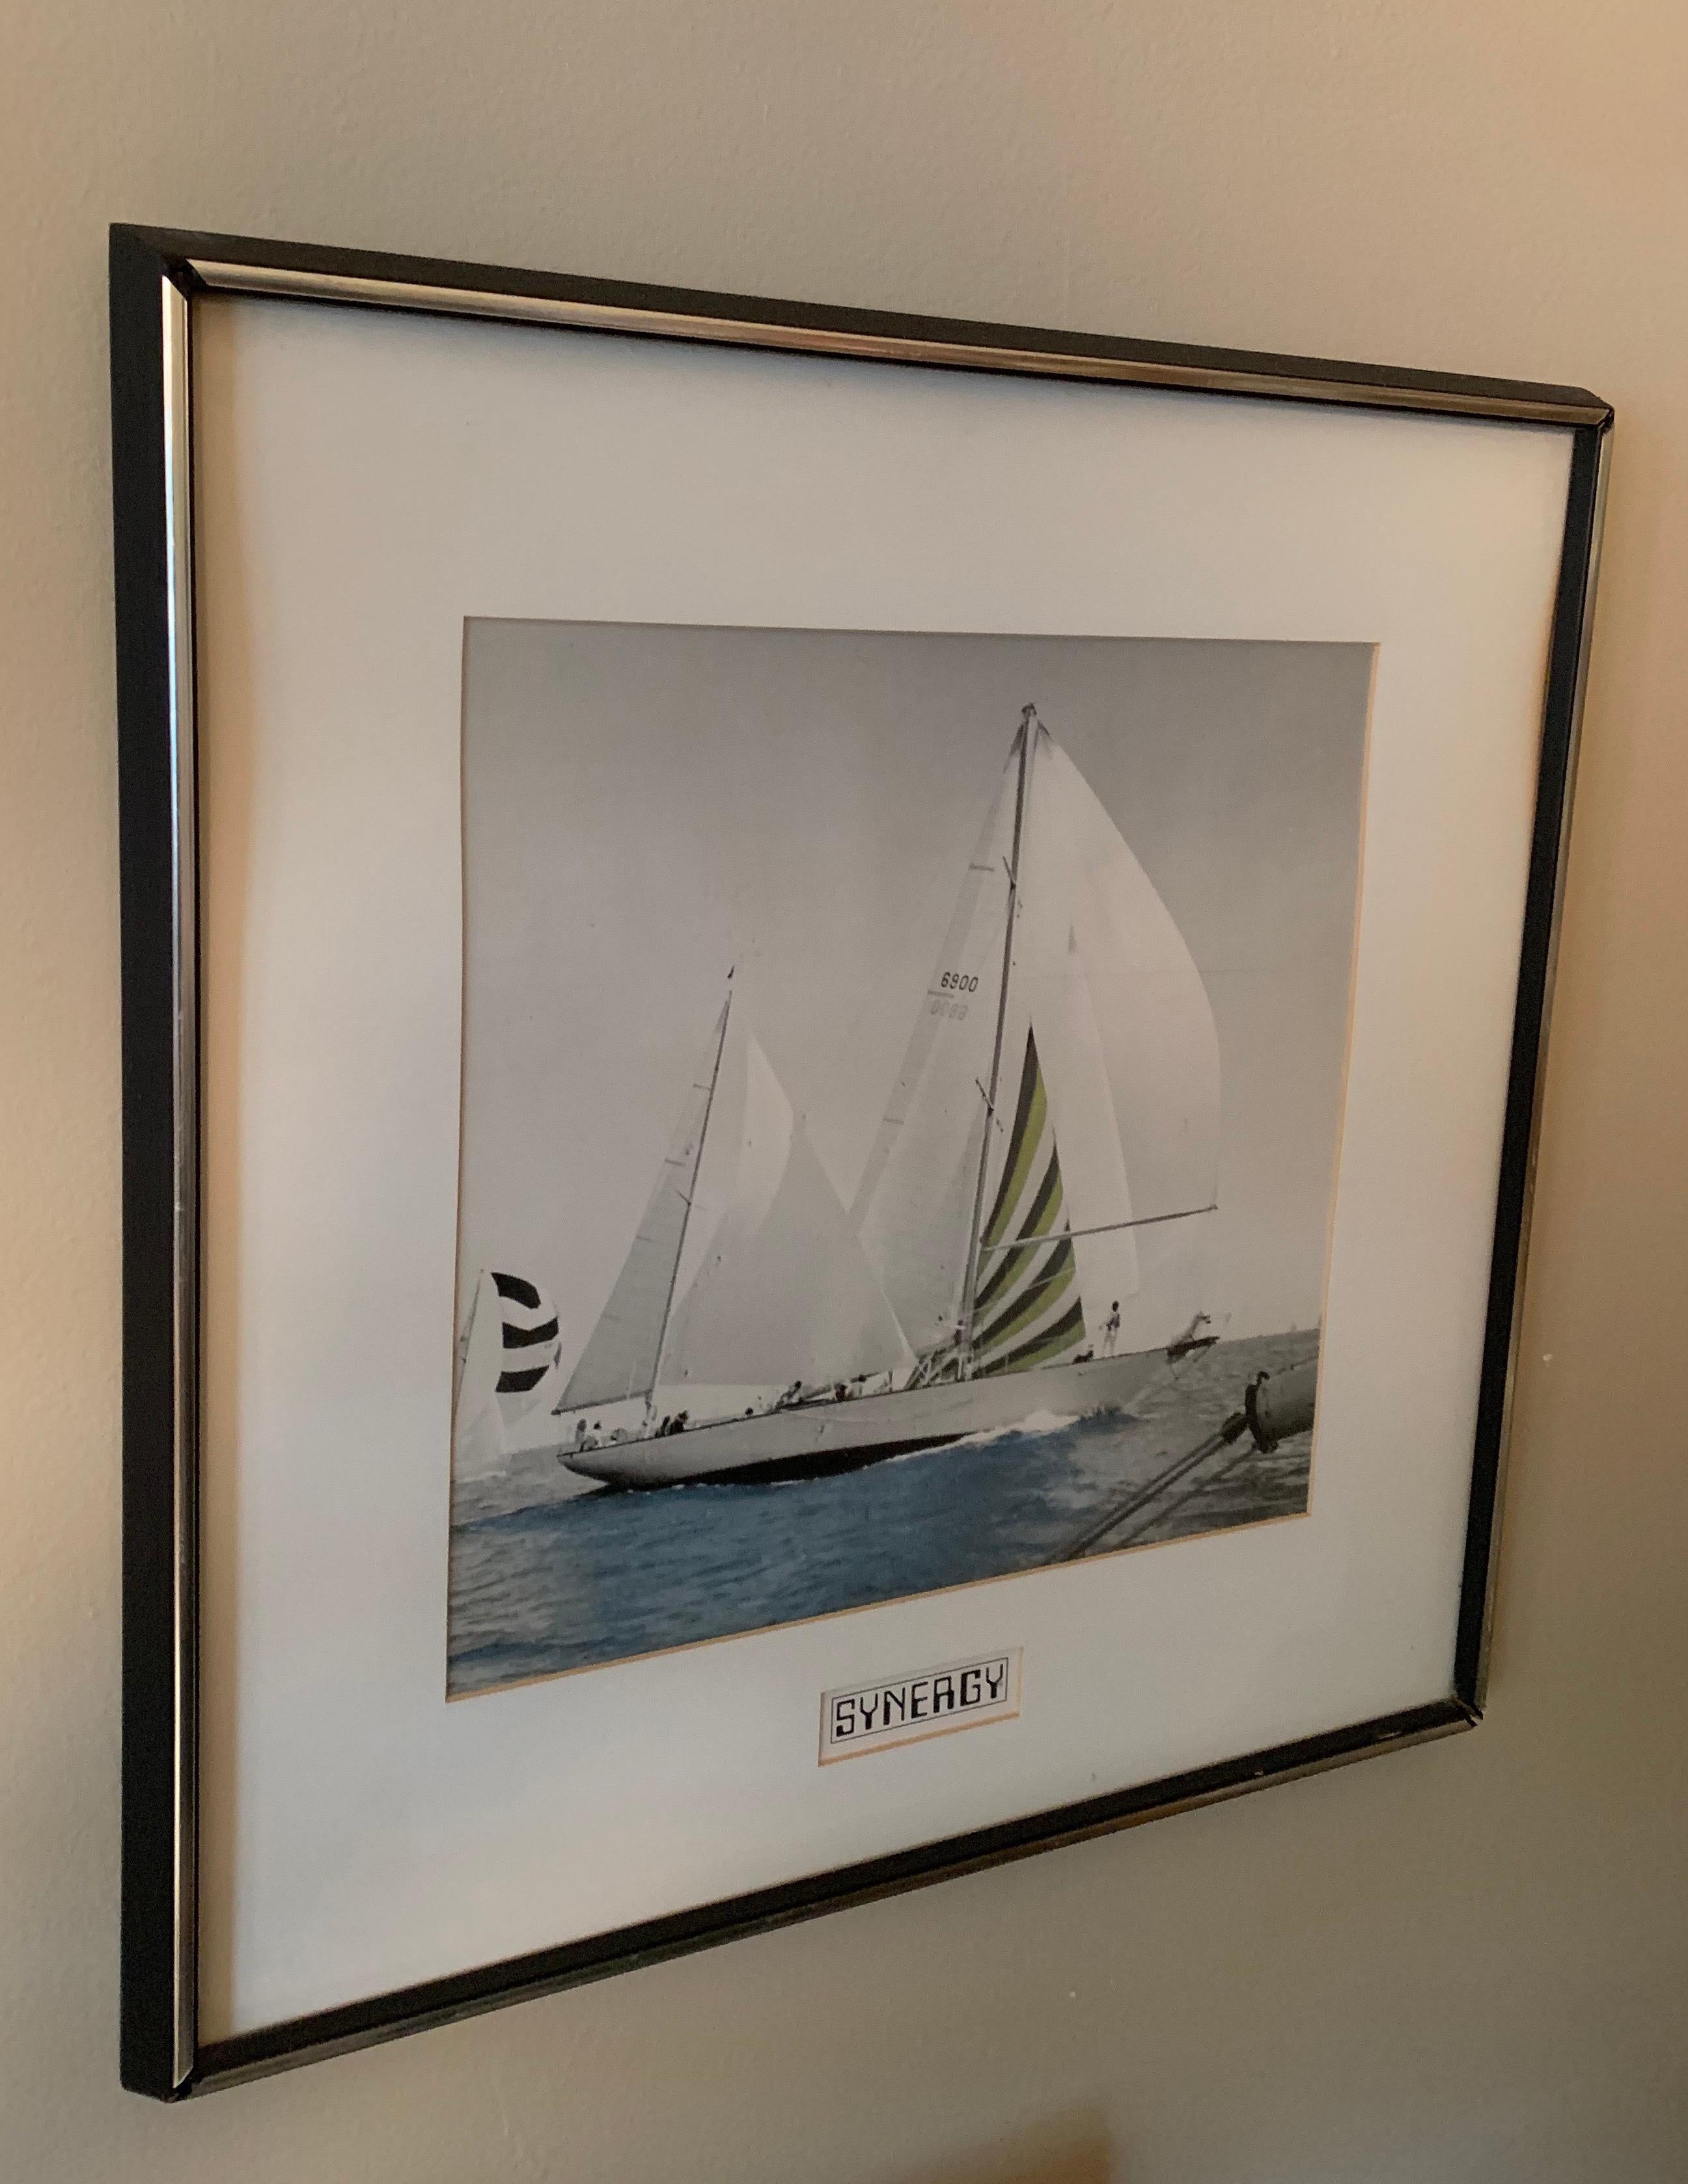 A vintage color photograph of the Synergy sailboat, USA, circa 1980. 

Custom matted and framed in a period black wood with chrome trimmed frame. 

Photo in VG/Very Good condition; light vintage wear to frame.

Overall size: 20-7/8 inches x